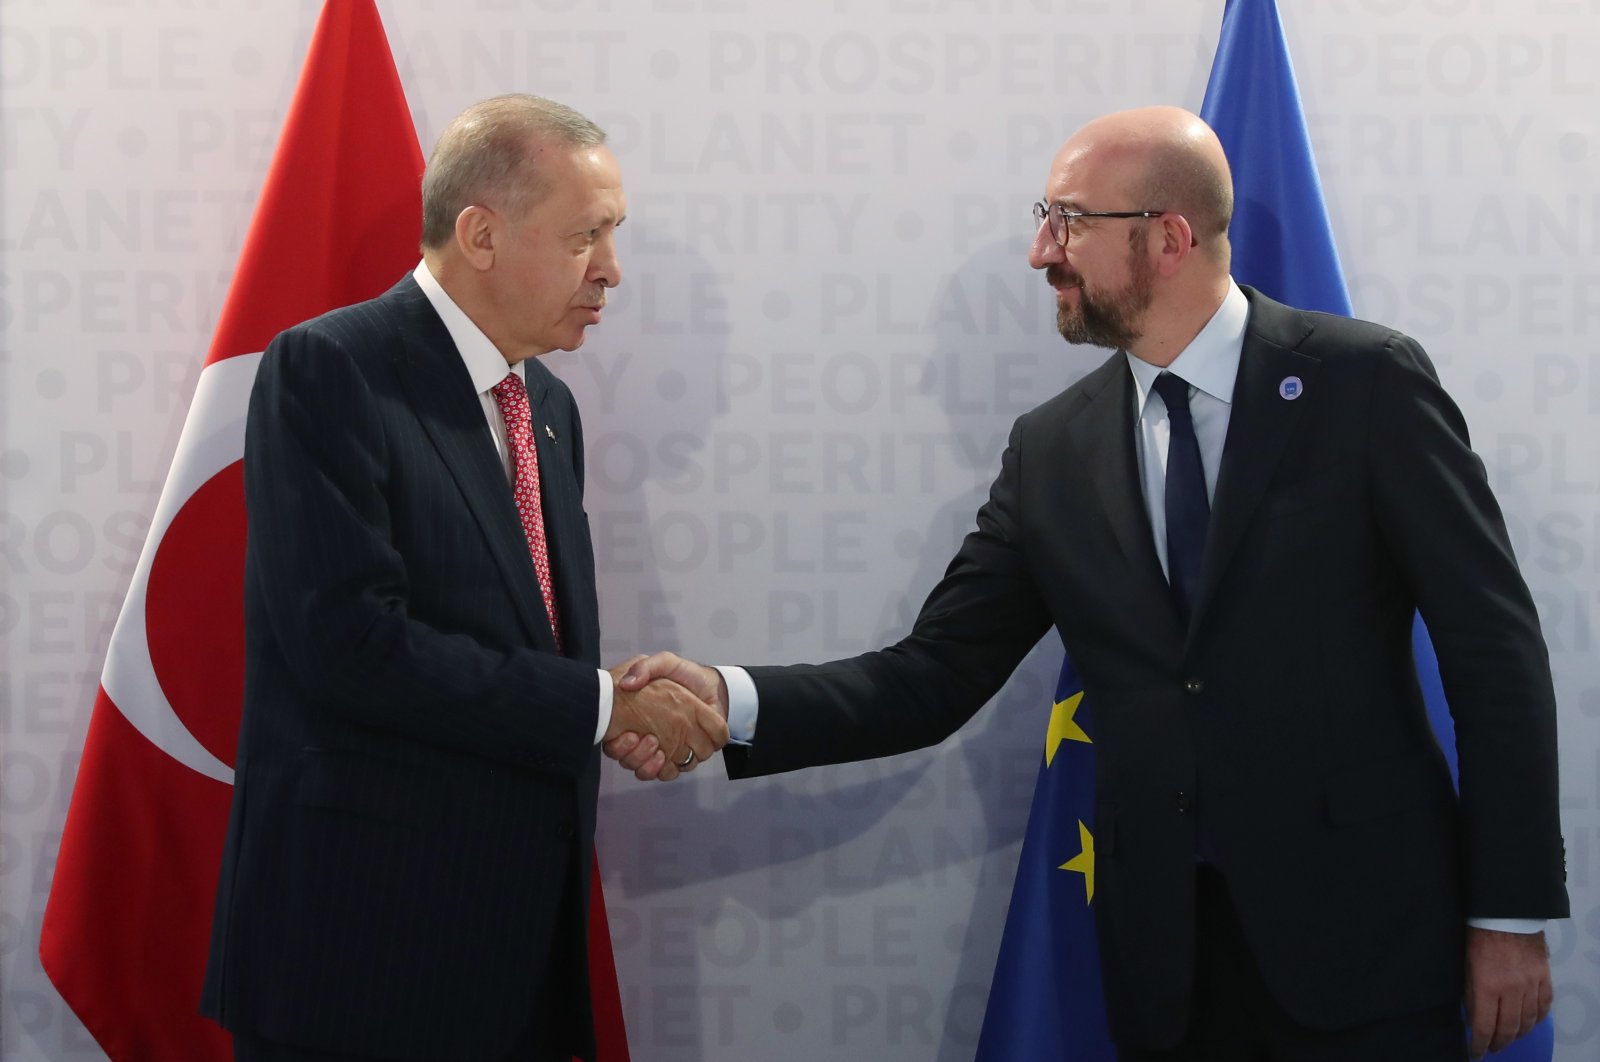 President Recep Tayyip Erdoğan shakes hands with European Council President Charles Michel at the G-20 summit in Rome, Italy, Oct. 31, 2021 (IHA Photo)